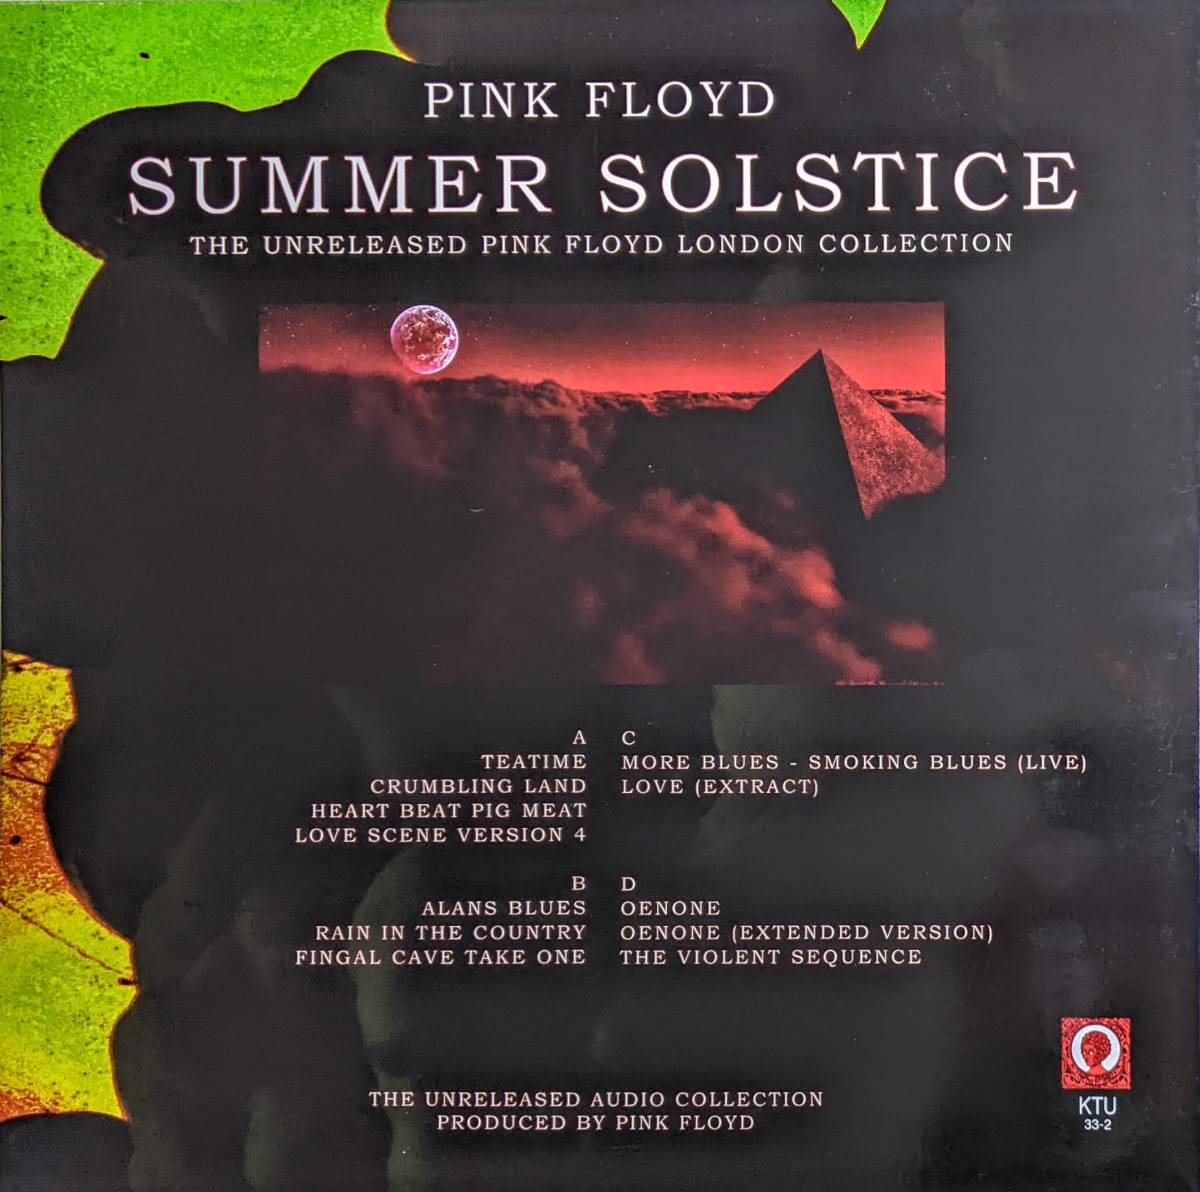 PayPayフリマ｜Pink Floyd ピンク・フロイド - Summer Solstice (The Unreleased Pink Floyd  London Collection) 限定二枚組アナログ・レコード